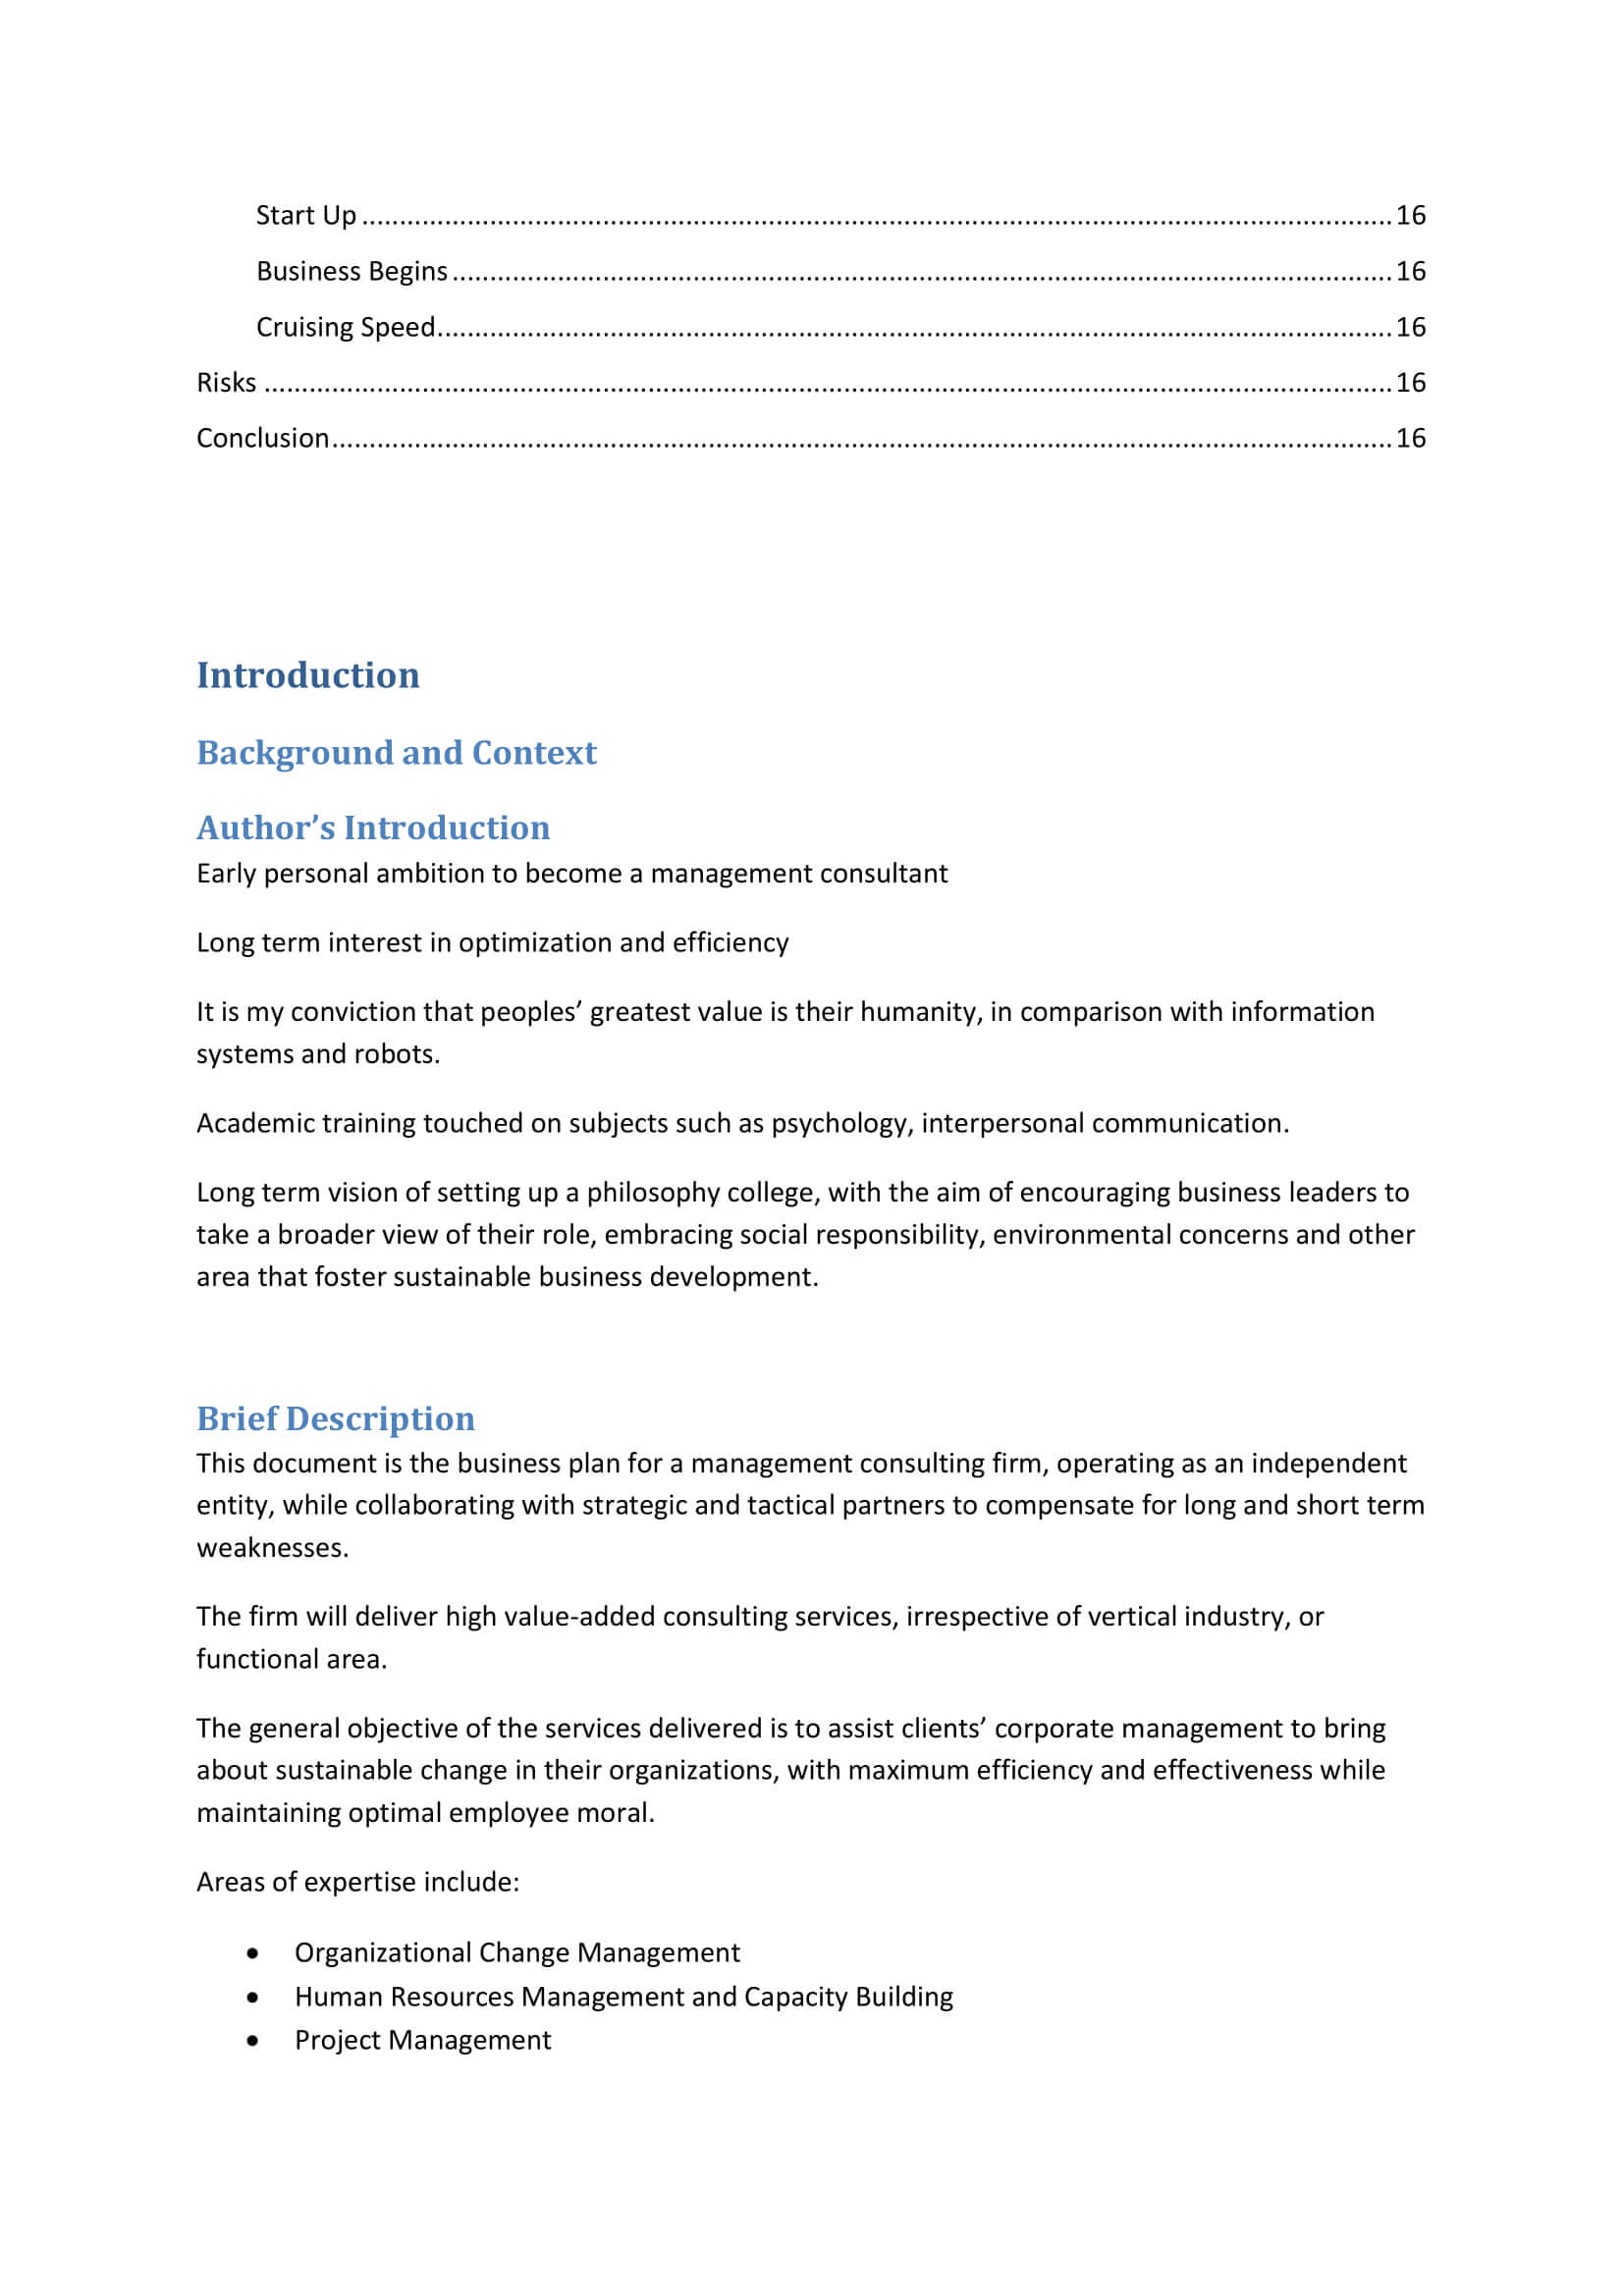 023 Consulting Business Plan Template Ideas Consultant Within Business Plan Template For Consulting Firm